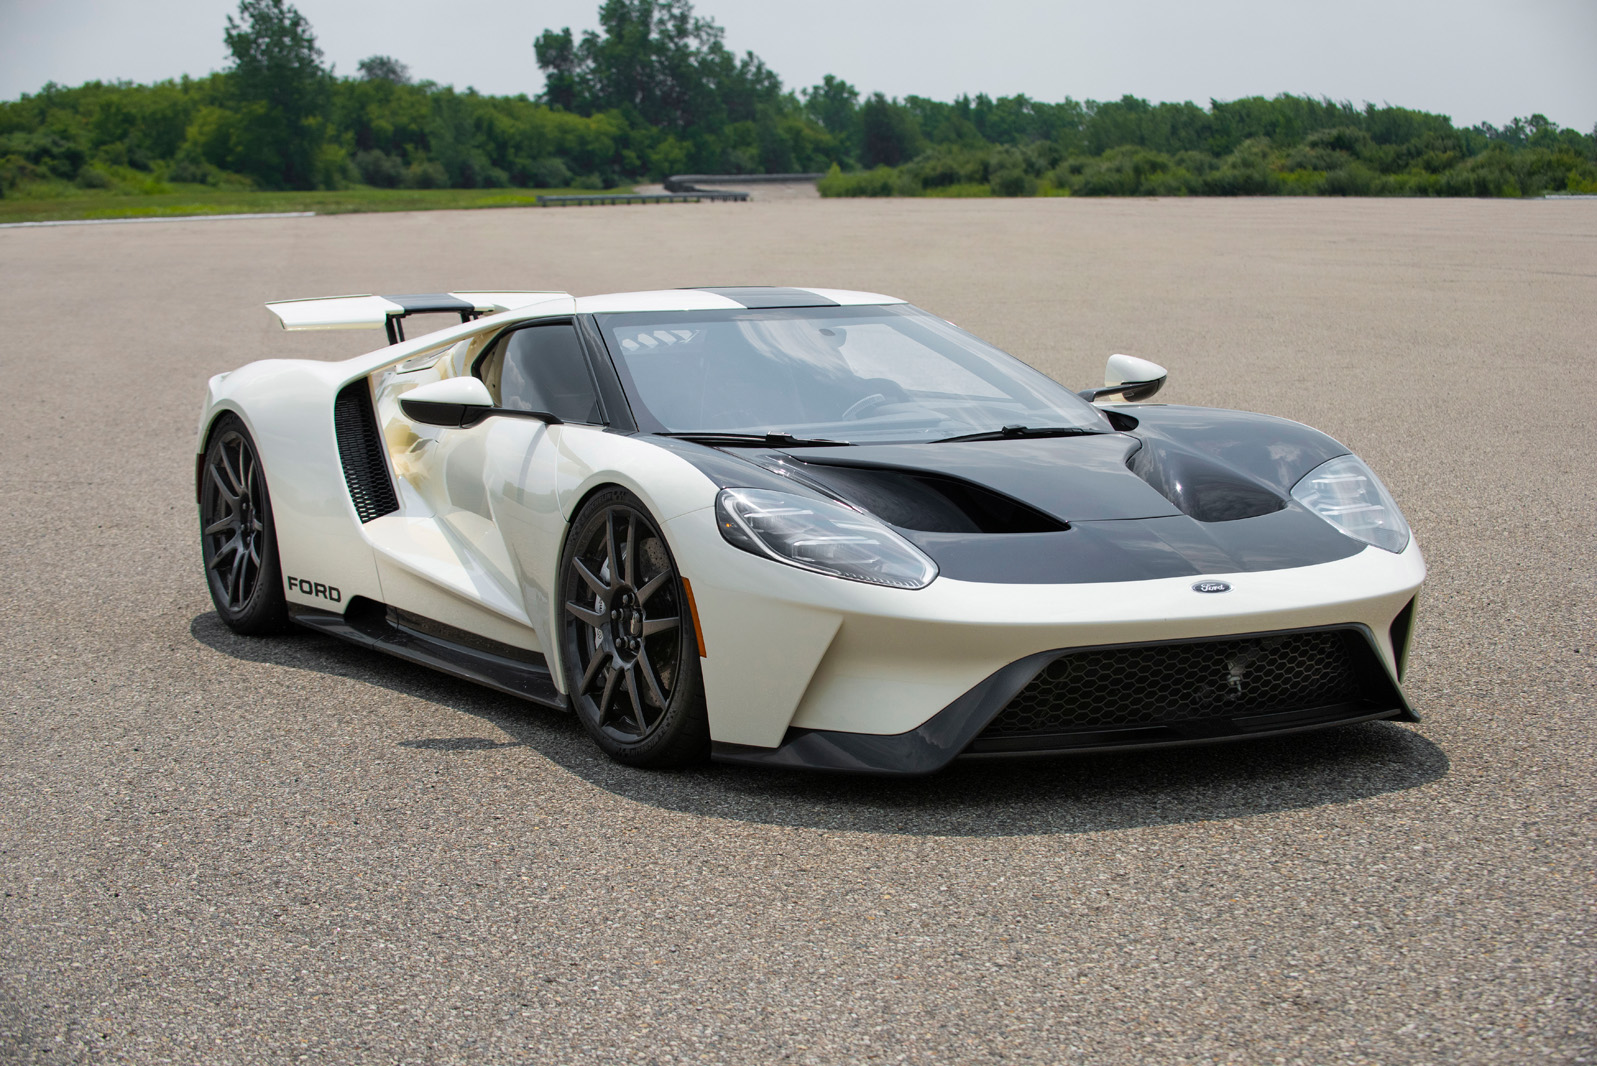 aria-label="2022fordgt64heritageedition 06"